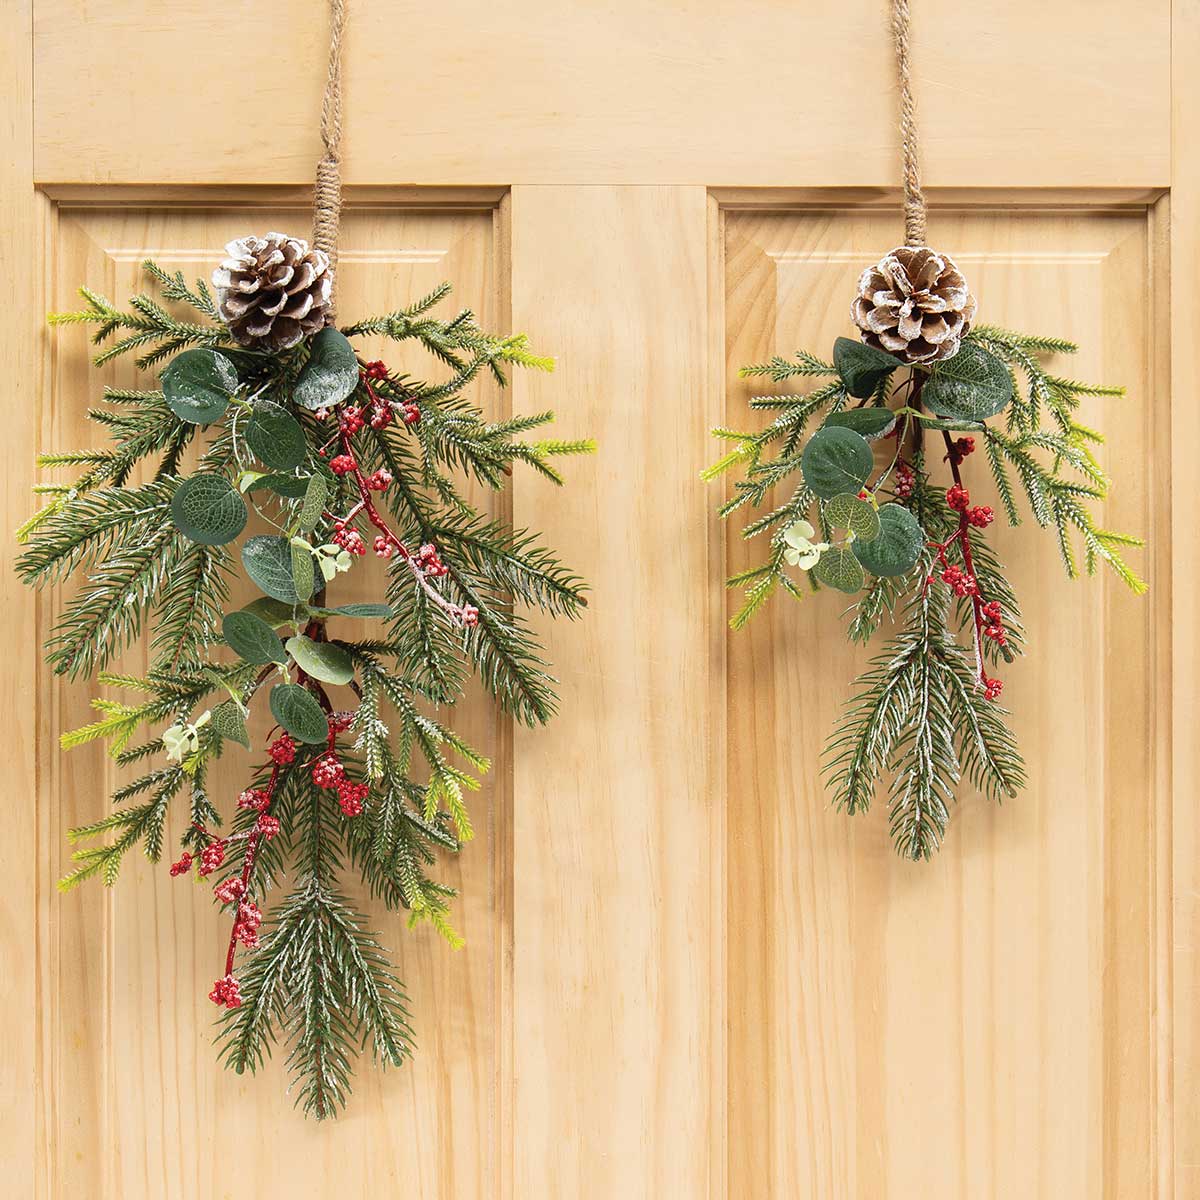 !HOLIDAY BERRY DROP WITH RED BERRIES, PINE, EUCALYPTUS